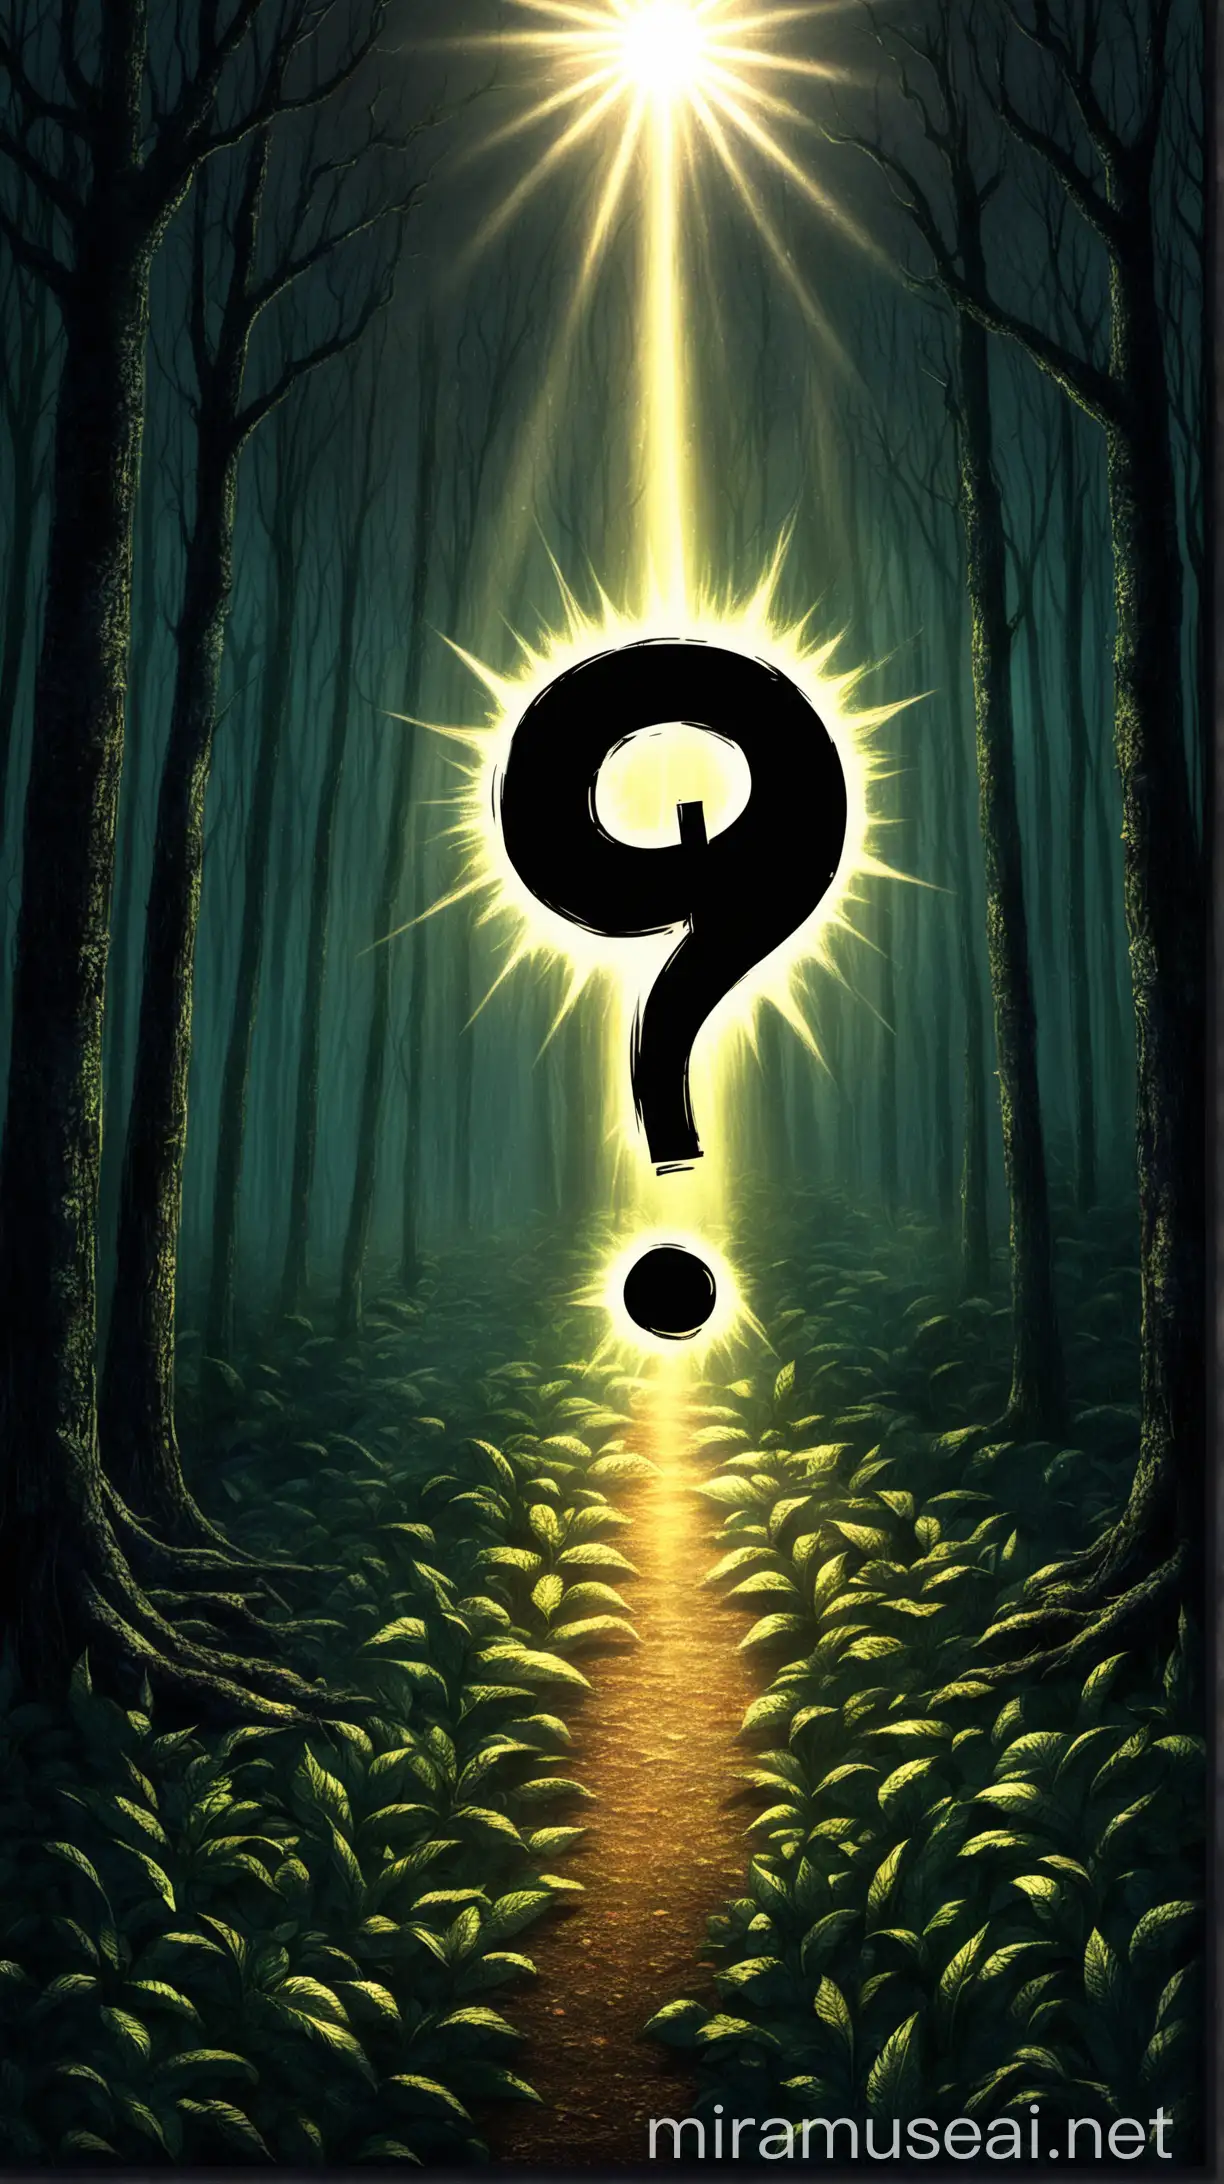 Mystical Question Mark in Dark Forest with Sunlight